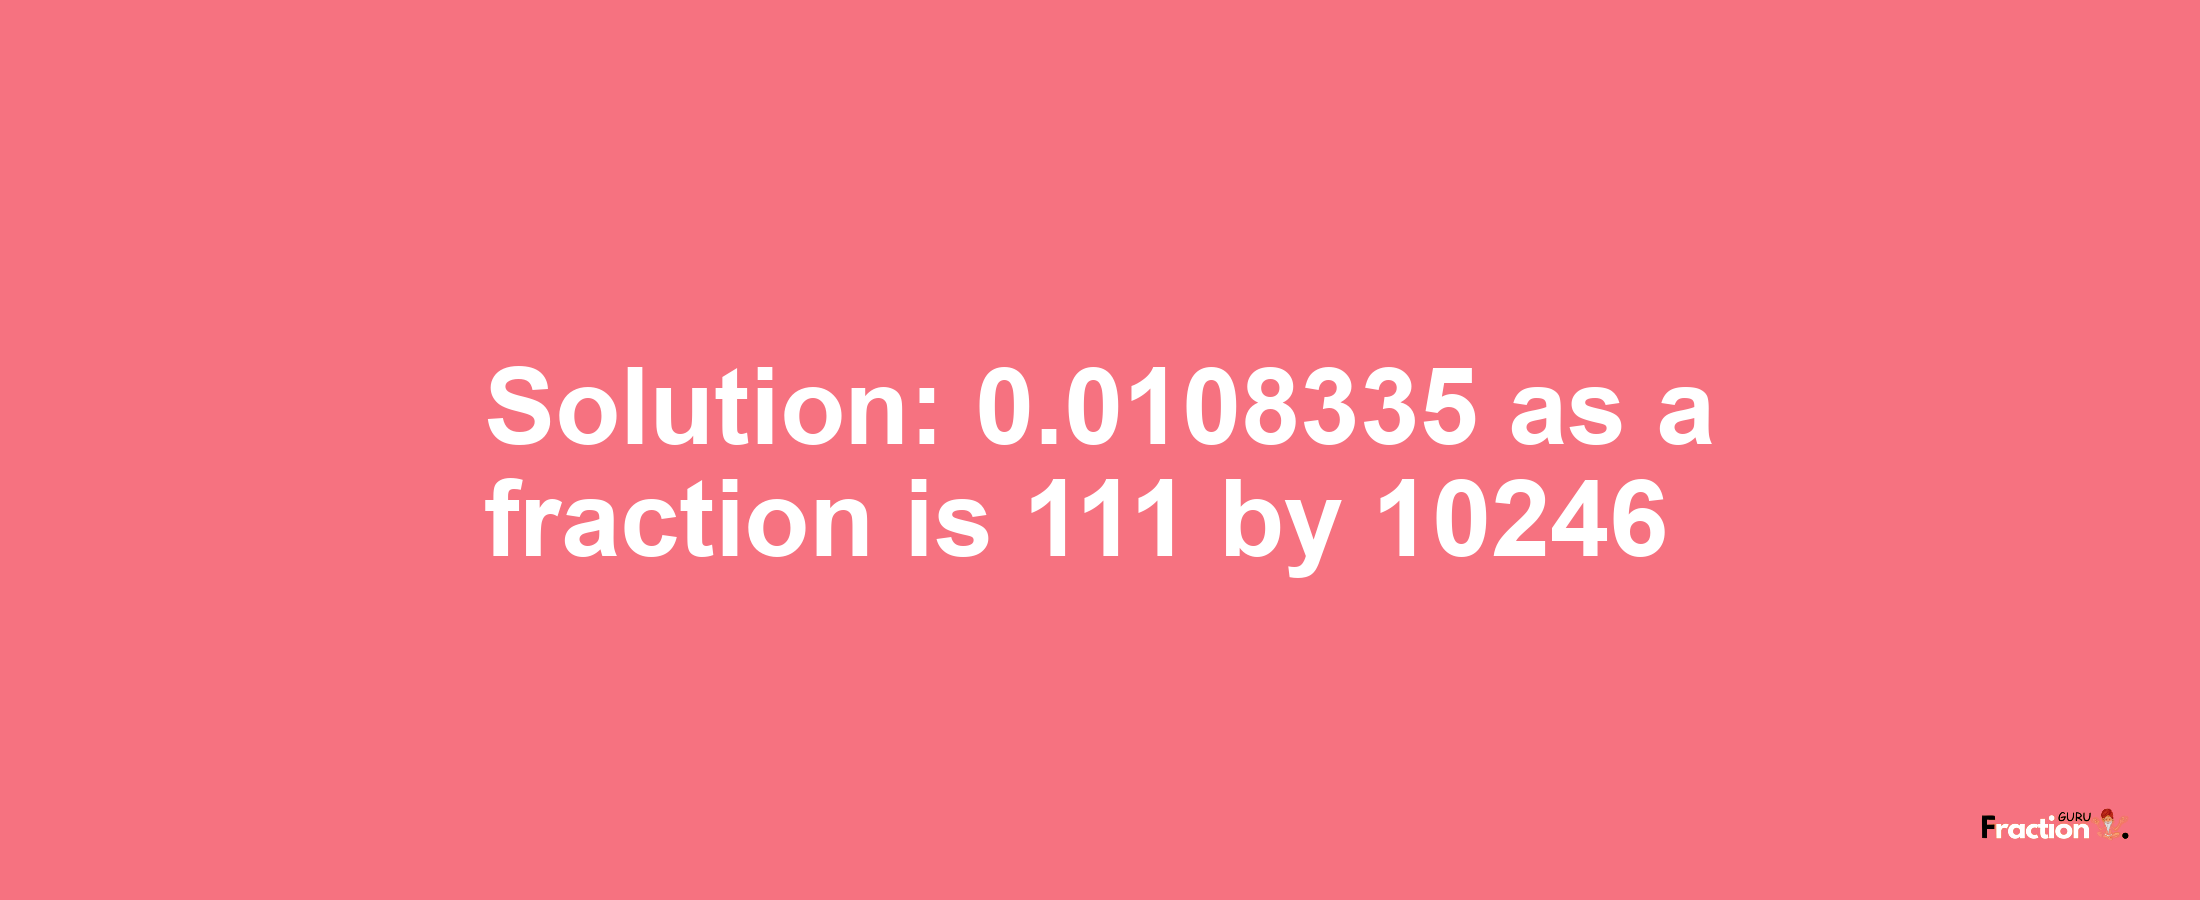 Solution:0.0108335 as a fraction is 111/10246